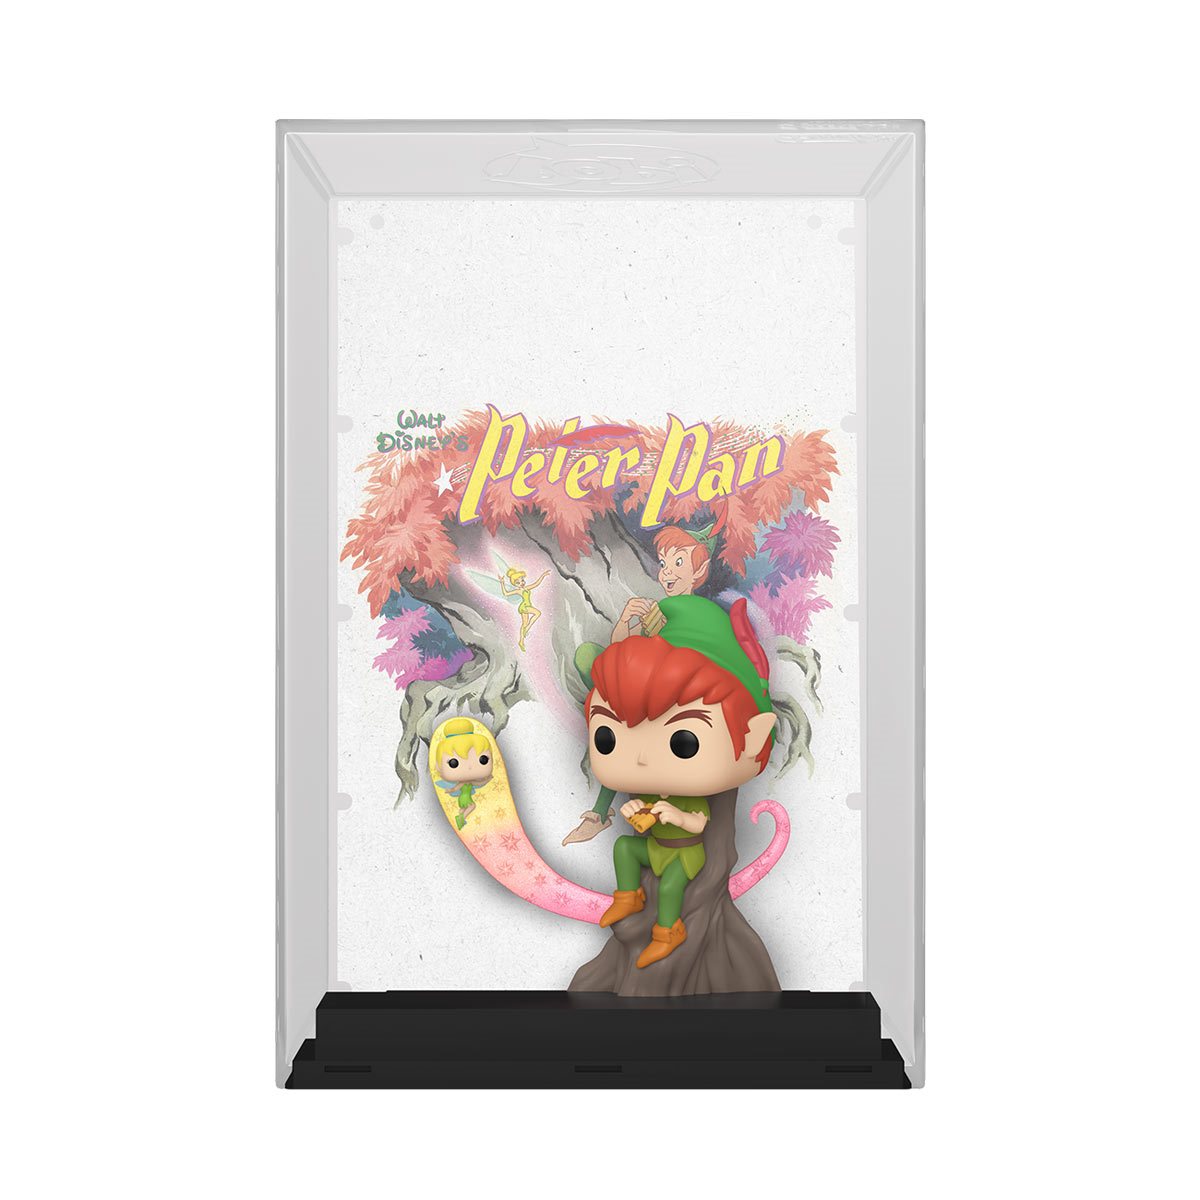 Funko Pop! - Disney 100: Peter Pan and Tinker Bell Movie Poster